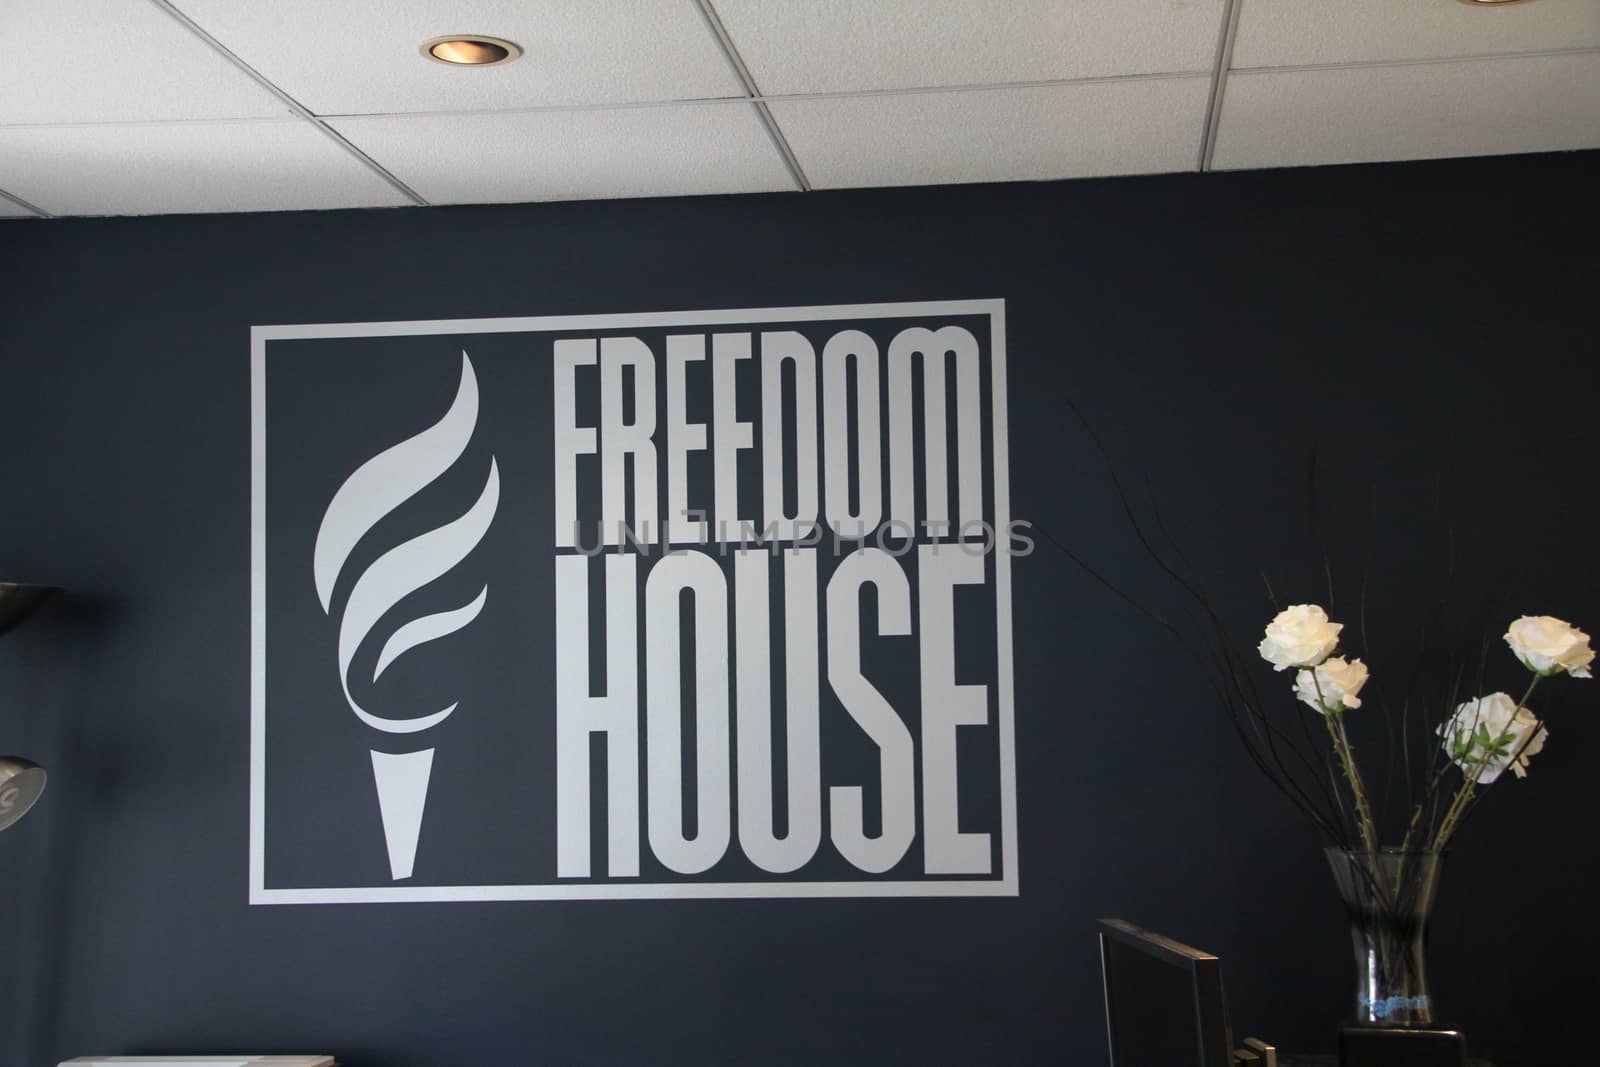 Washington DC, USA - may 17, 2012. the logo of the organization Freedom house in their office in Washington, D.C.